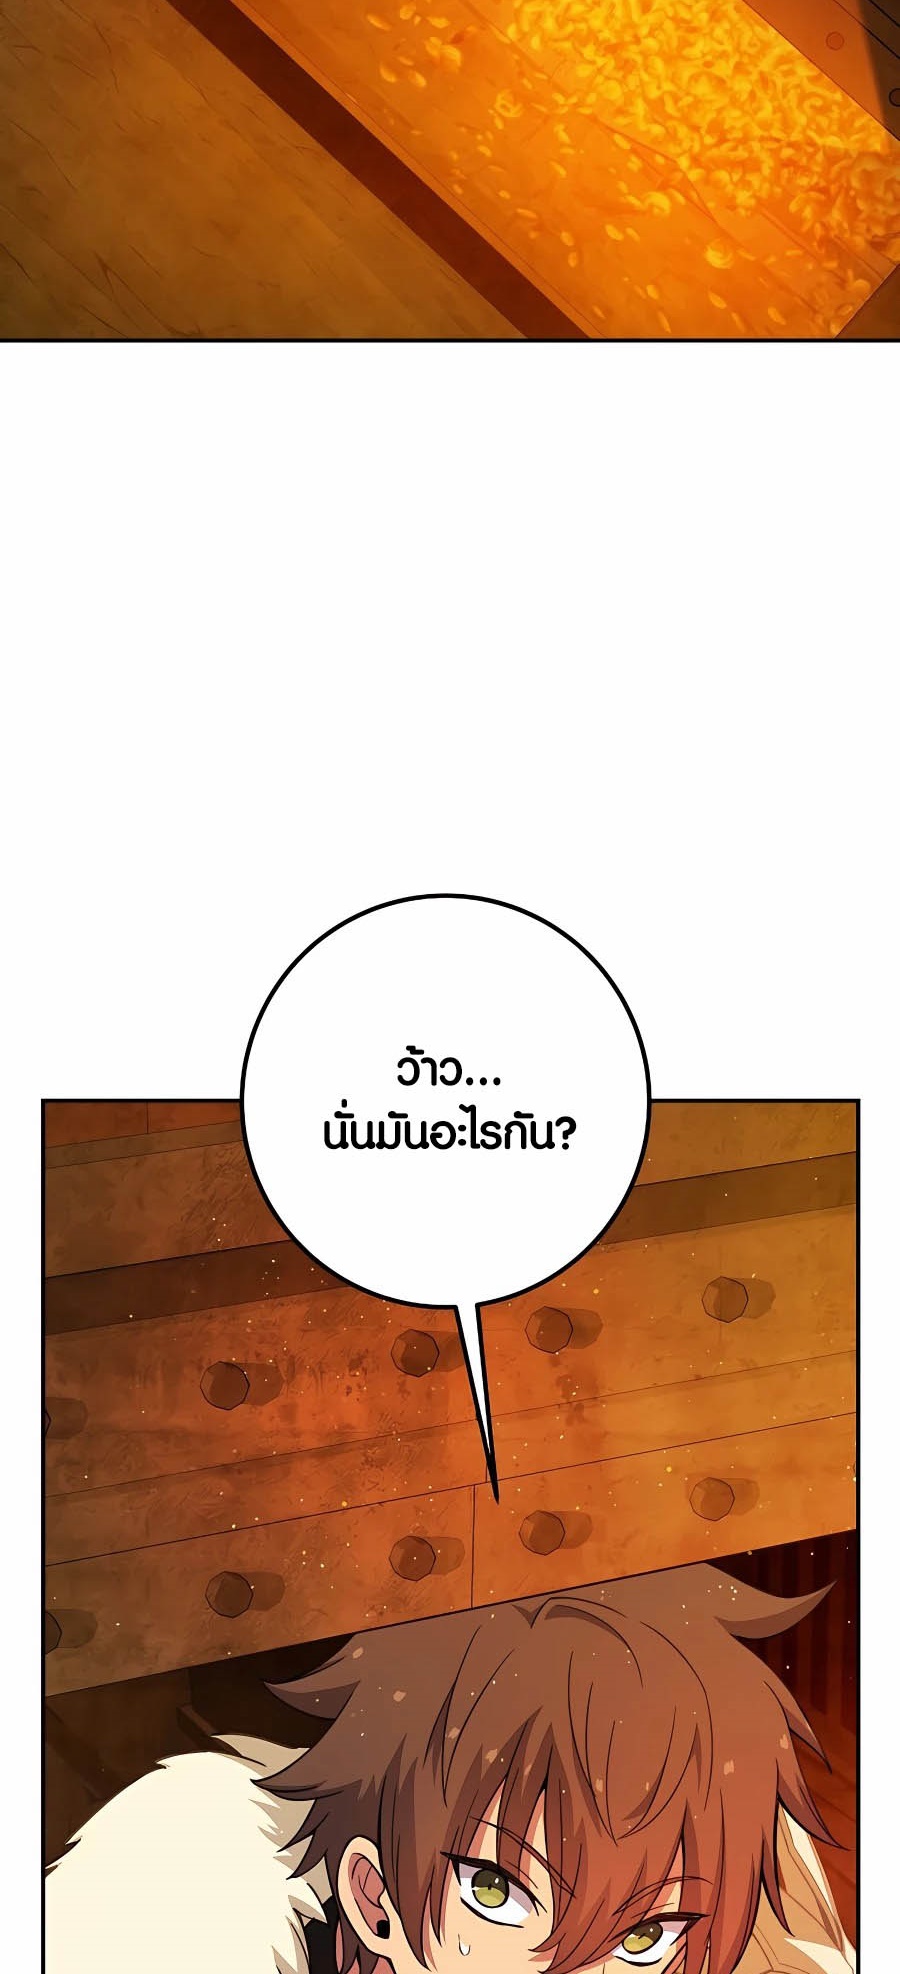 à¸­à¹ˆà¸²à¸™à¸¡à¸±à¸™à¸®à¸§à¸² à¹€à¸£à¸·à¹ˆà¸­à¸‡ The Part Time Land of the Gods 56 68